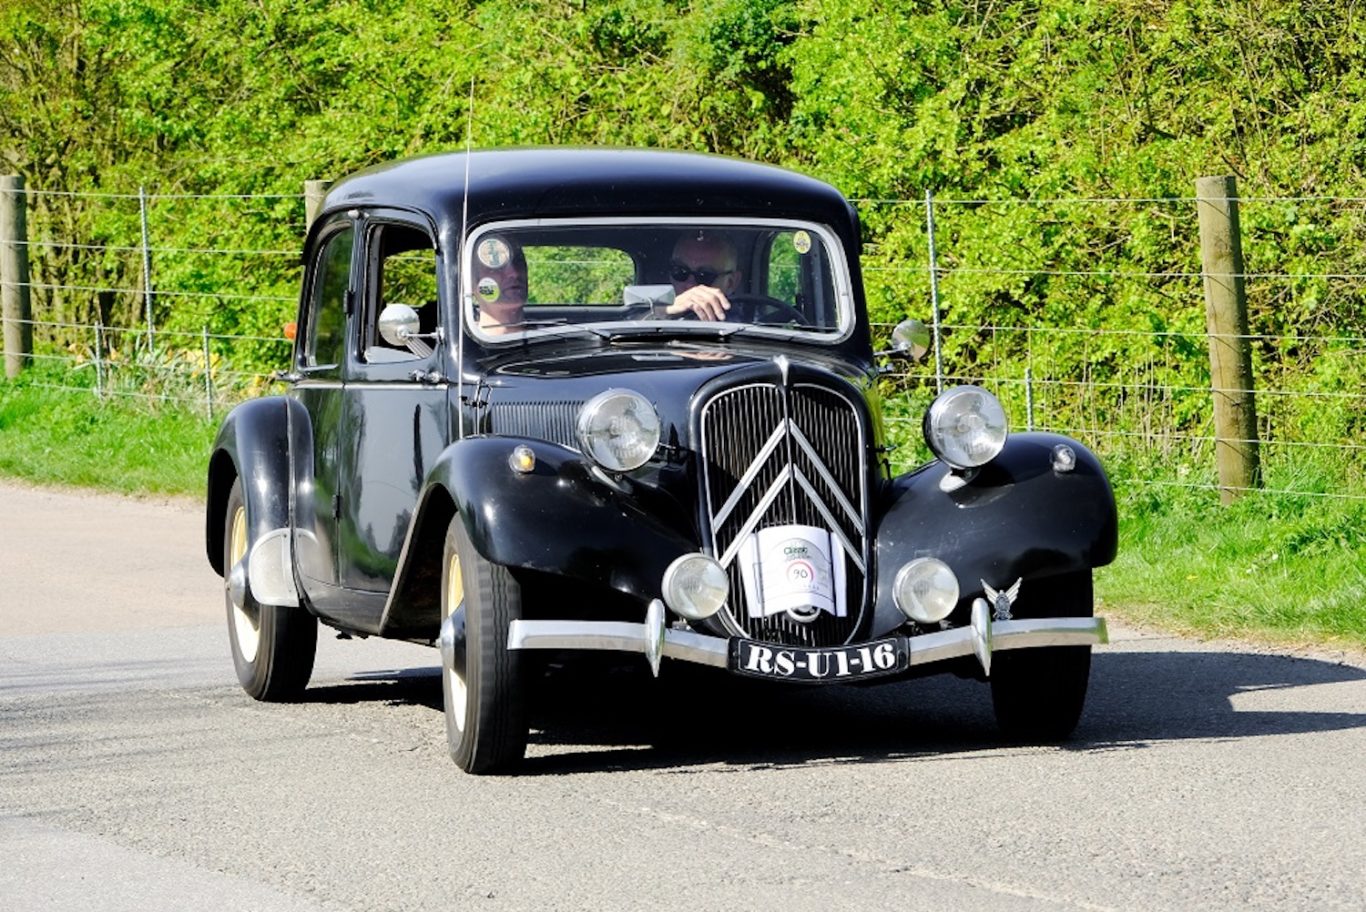 The Citroen Traction Avant remained in production for more than 20 years in one form or another